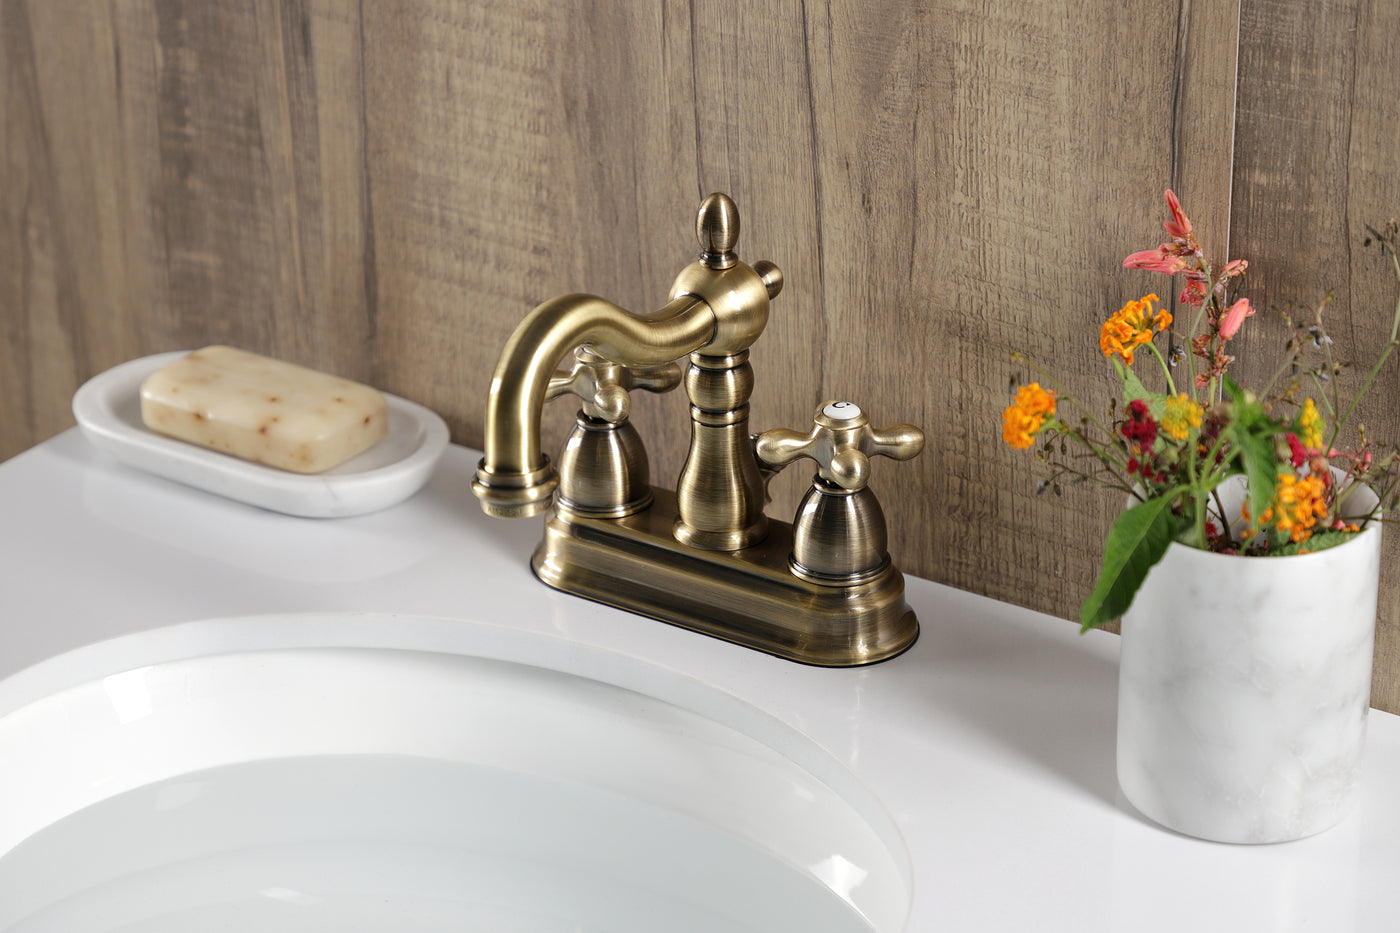 Elements of Design EB1603AX 4-Inch Centerset Bathroom Faucet with Plastic Pop-Up, Antique Brass